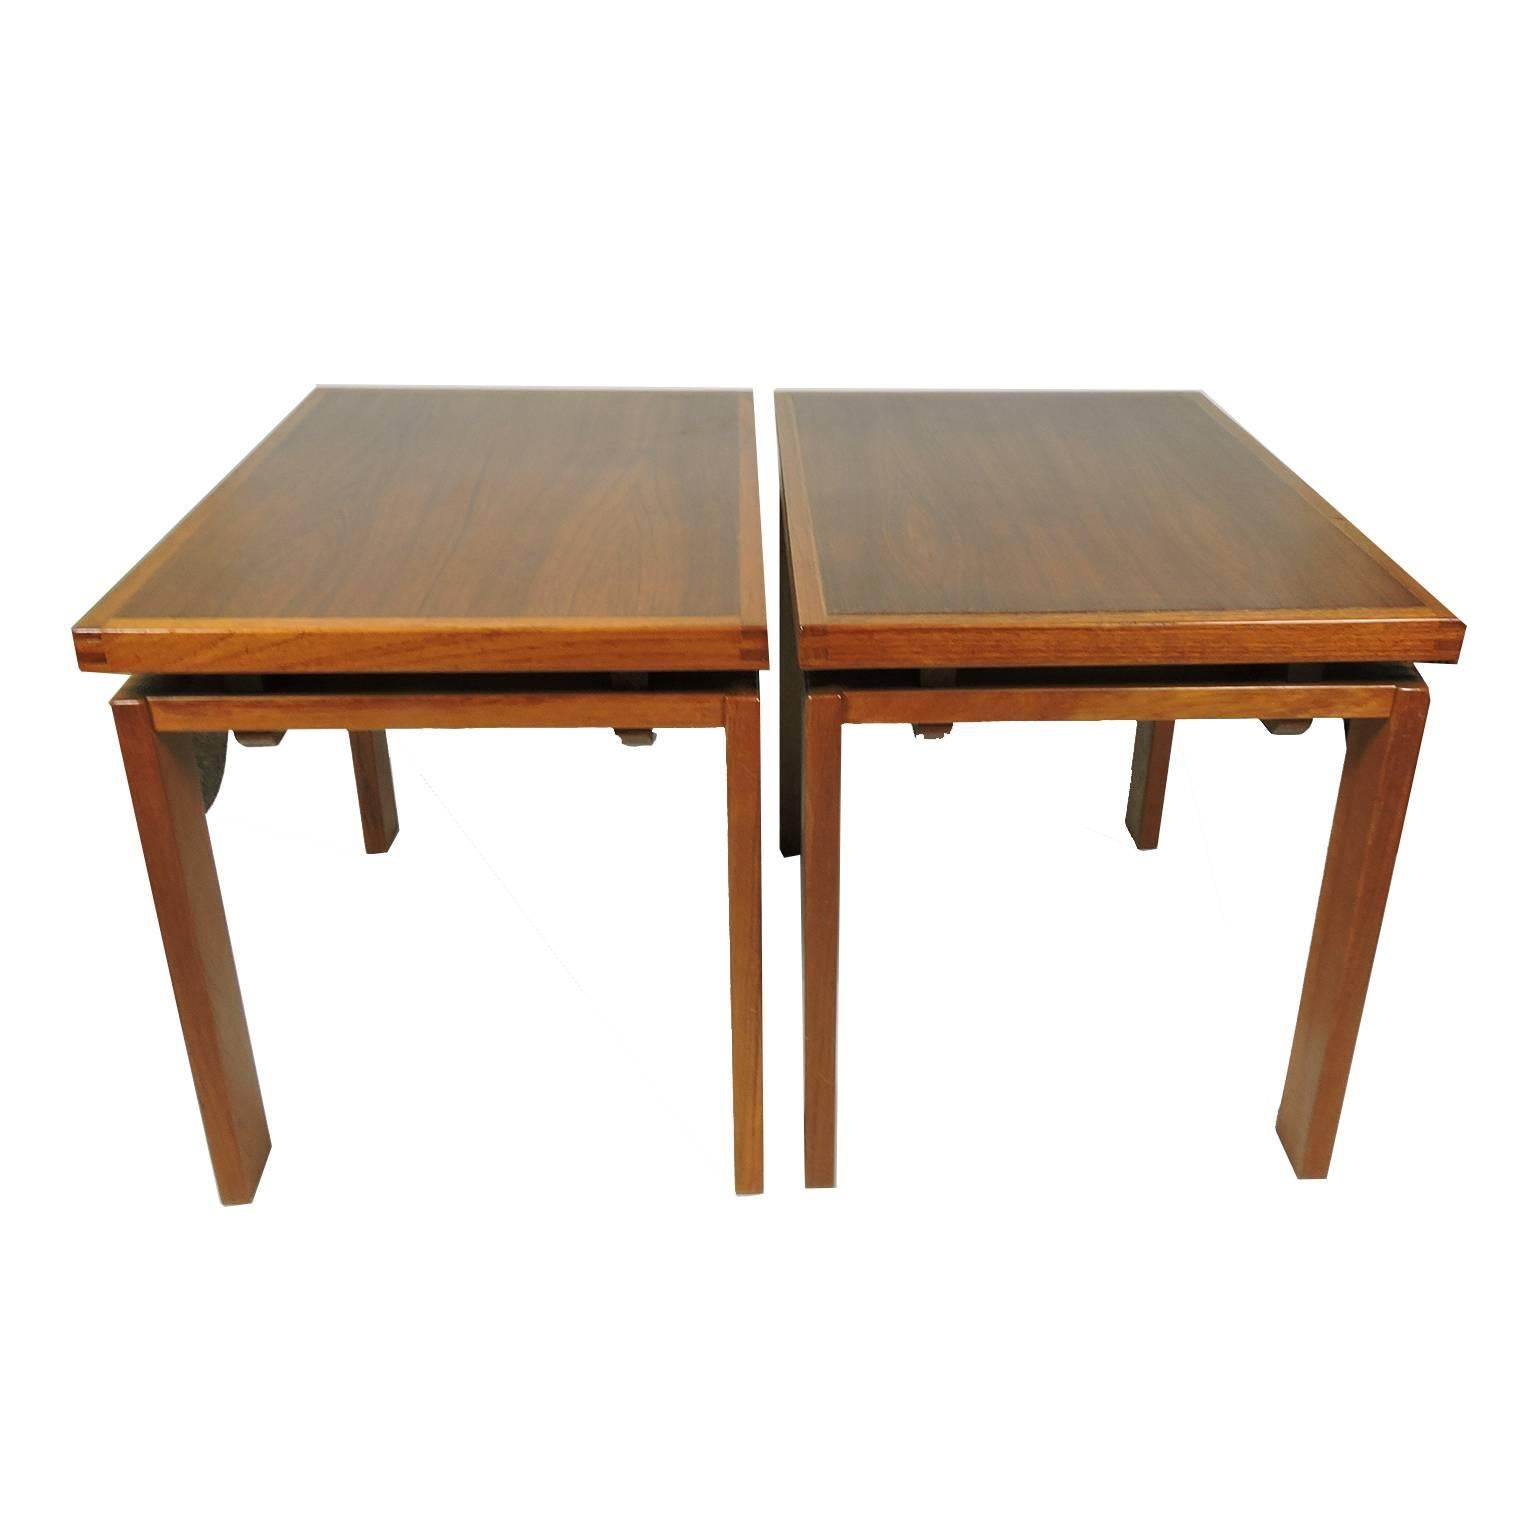 Pair of Danish Mid-Century Modern teak side tables, by Trioh Mobler, 20th century, stamped 